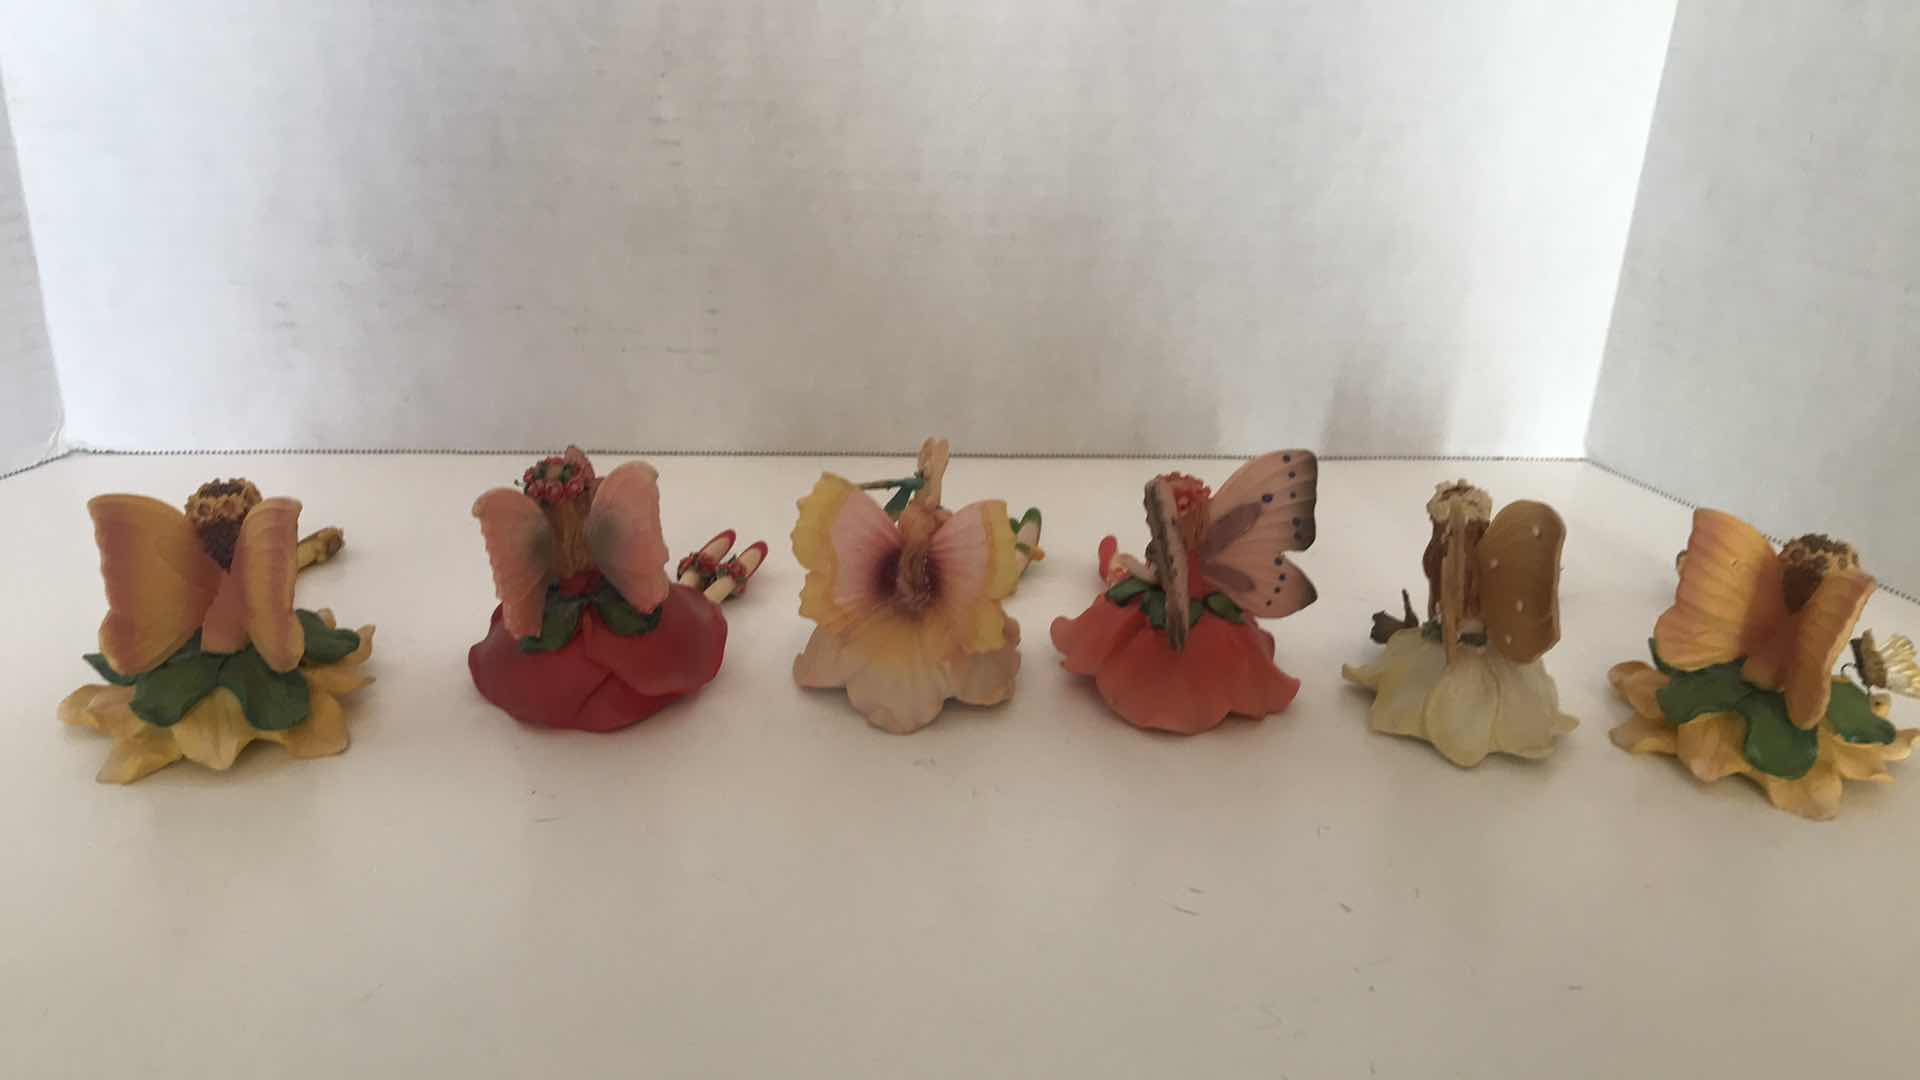 Photo 4 of COLLECTION OF SIX CERAMIC FAIRIES WITH DANGLING LEGS, APPROX 4” SITTING